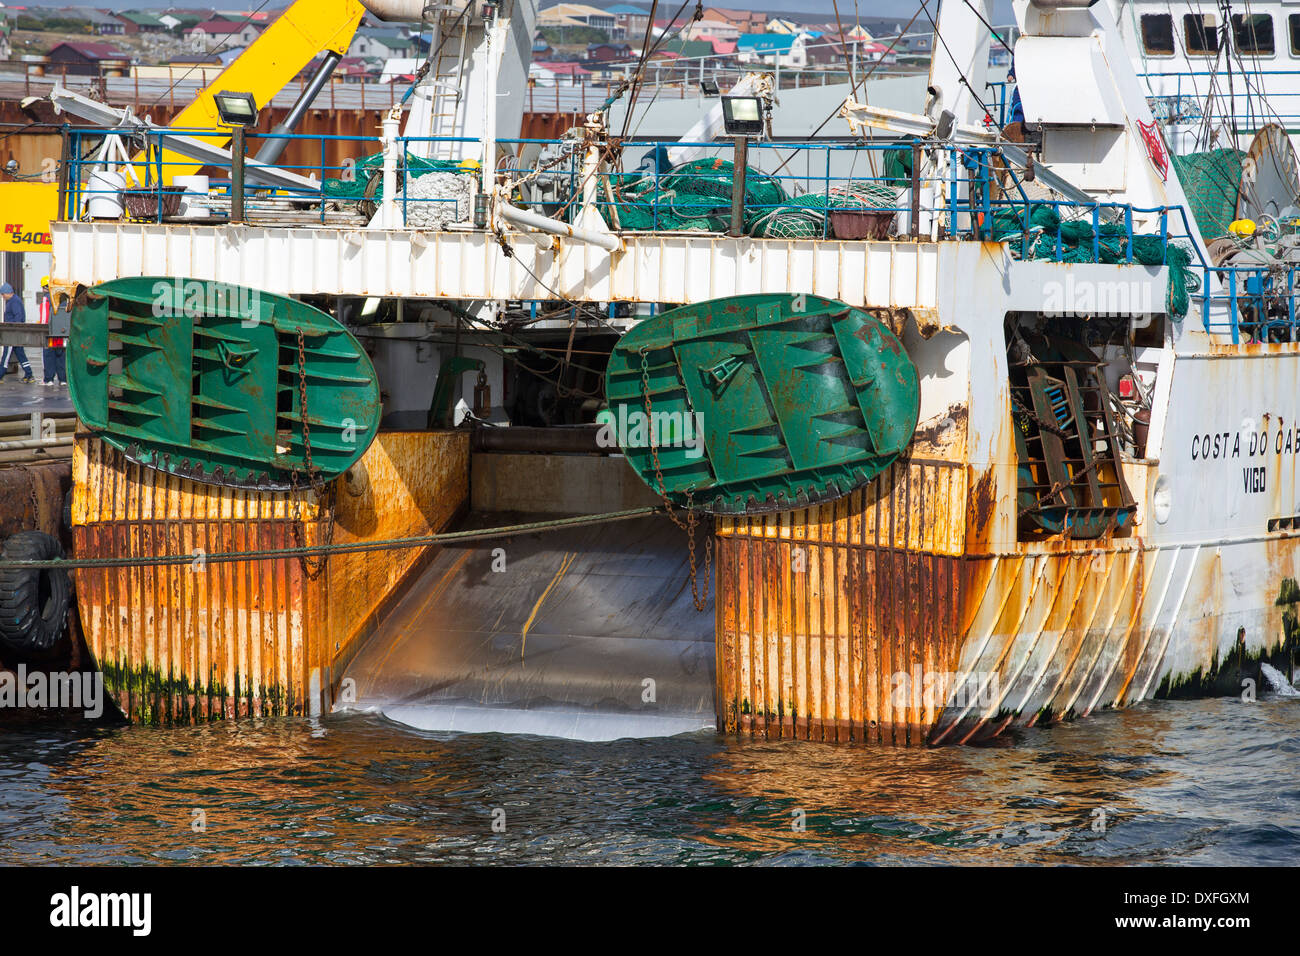 A Fishing trawler in Port Stanley in the Falkland Islands. Stock Photo